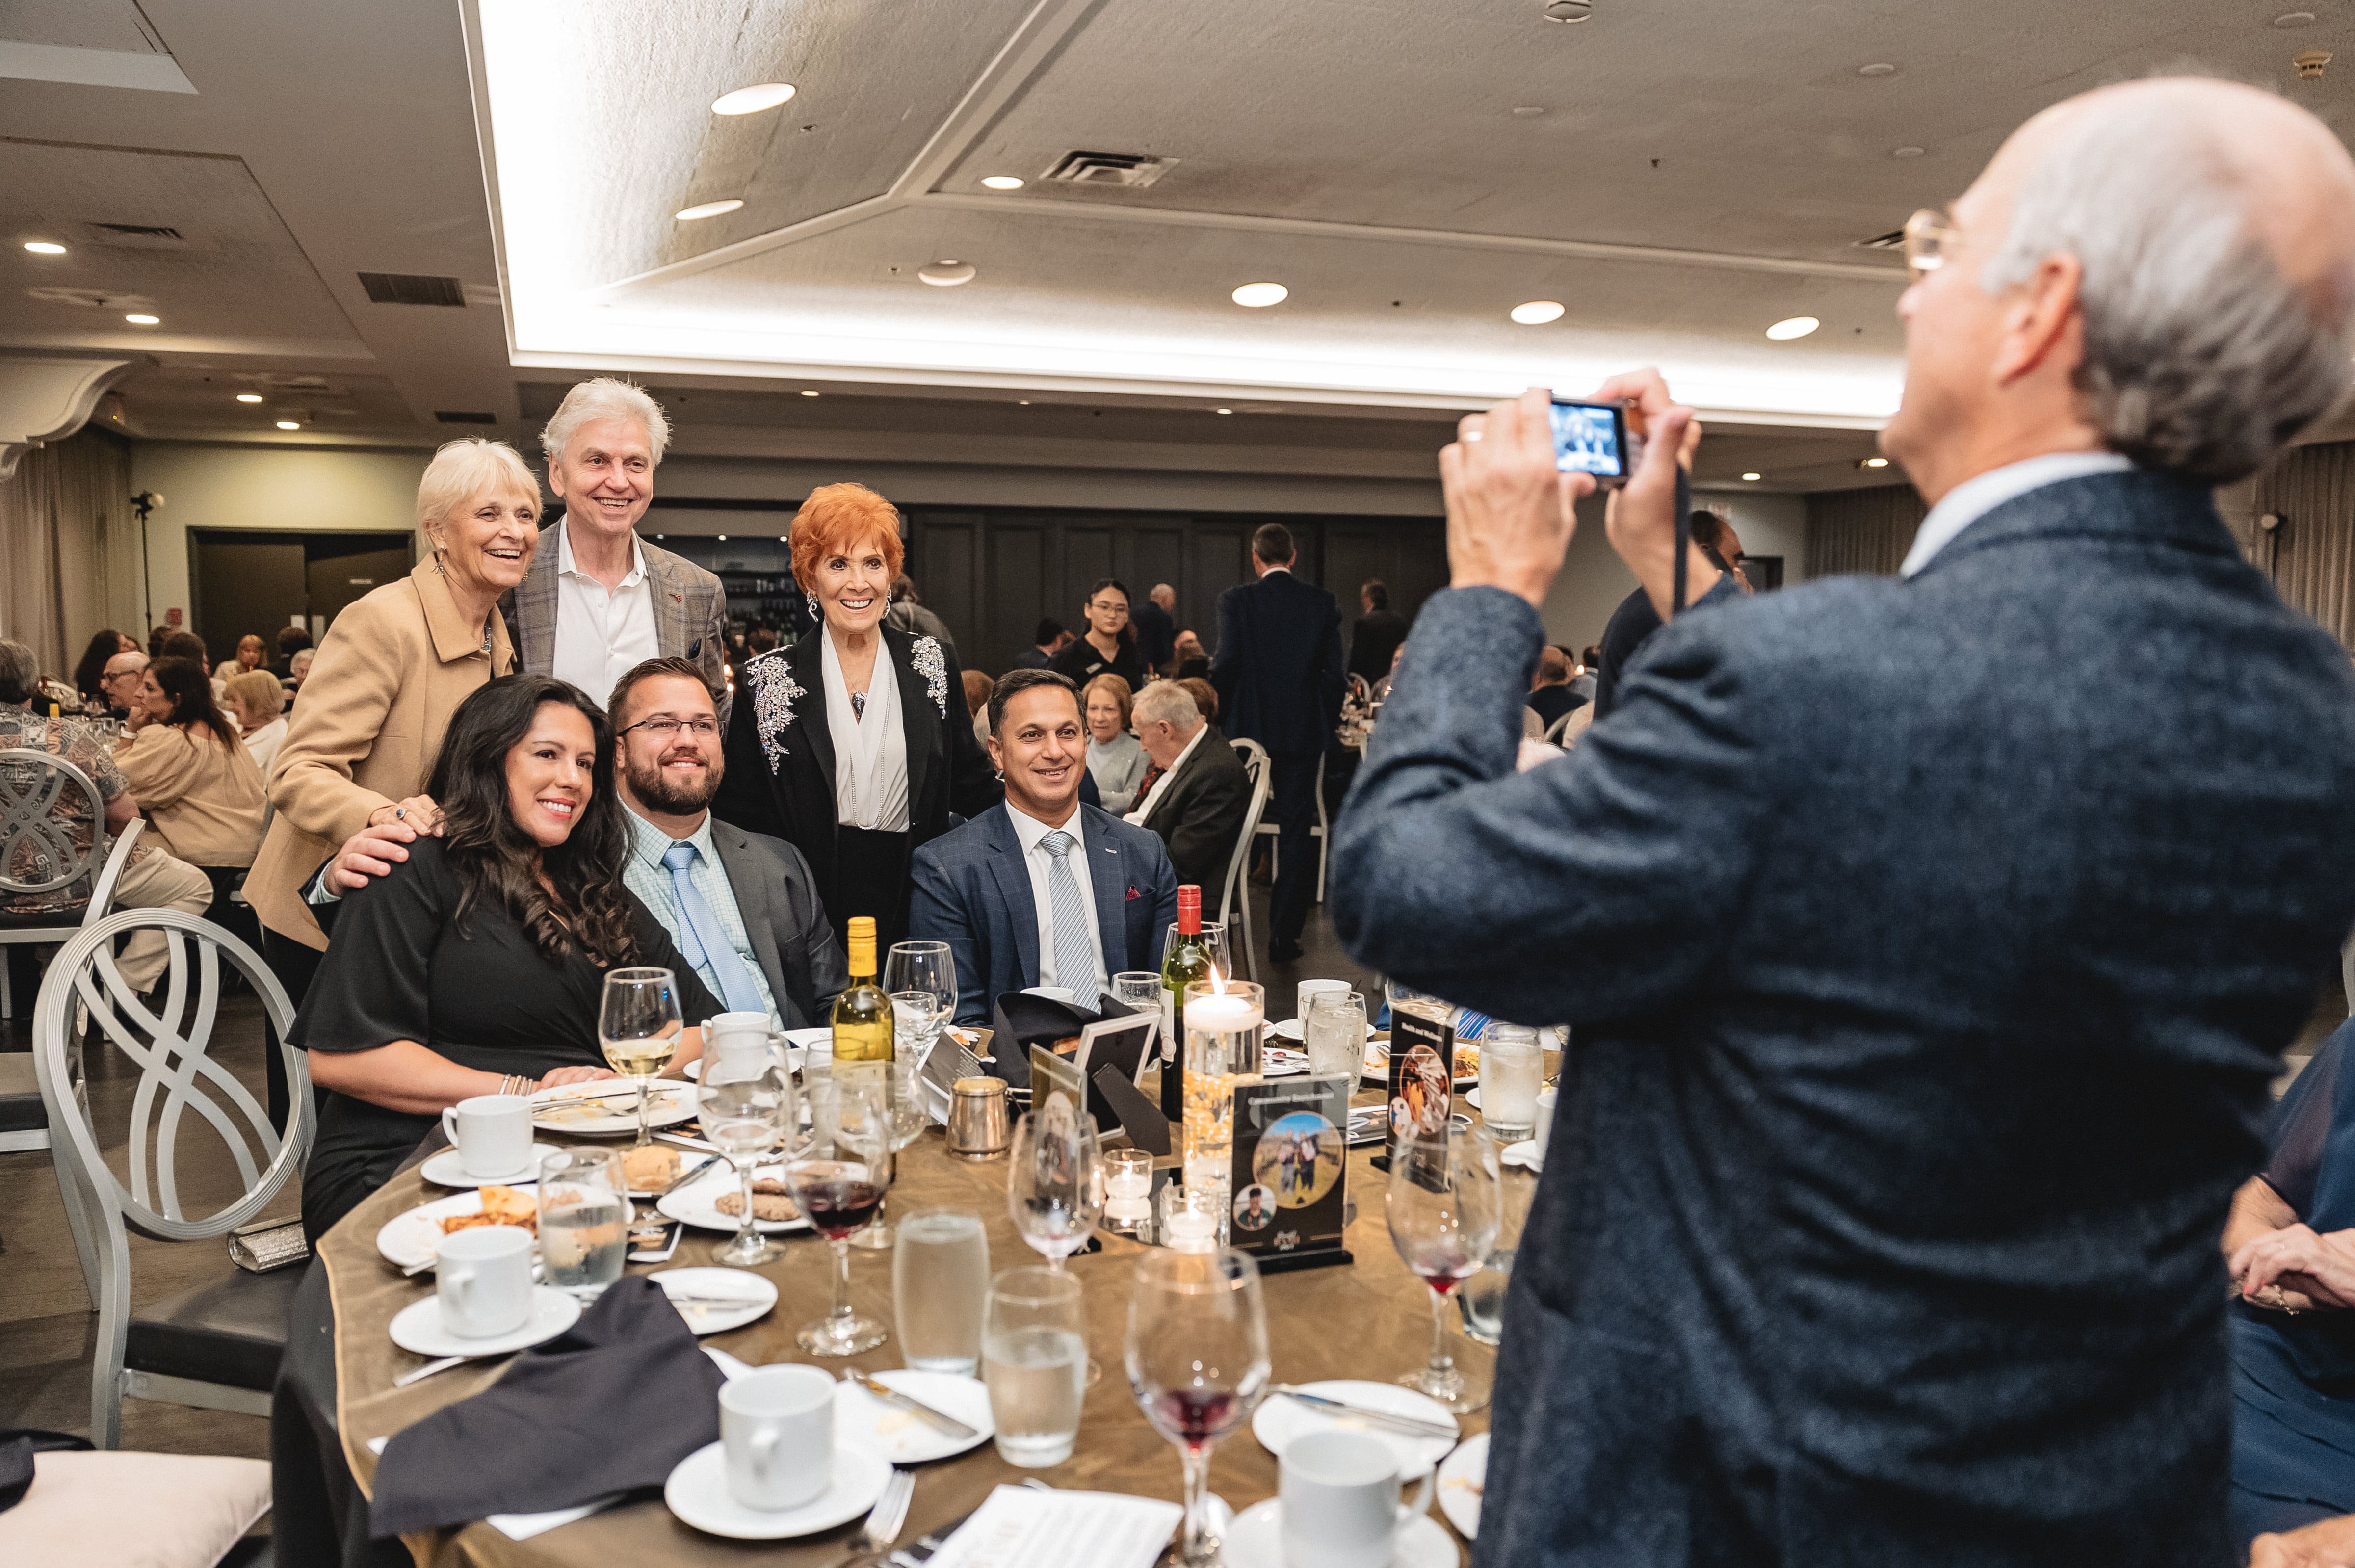 a man taking a picture of a group of people around a table